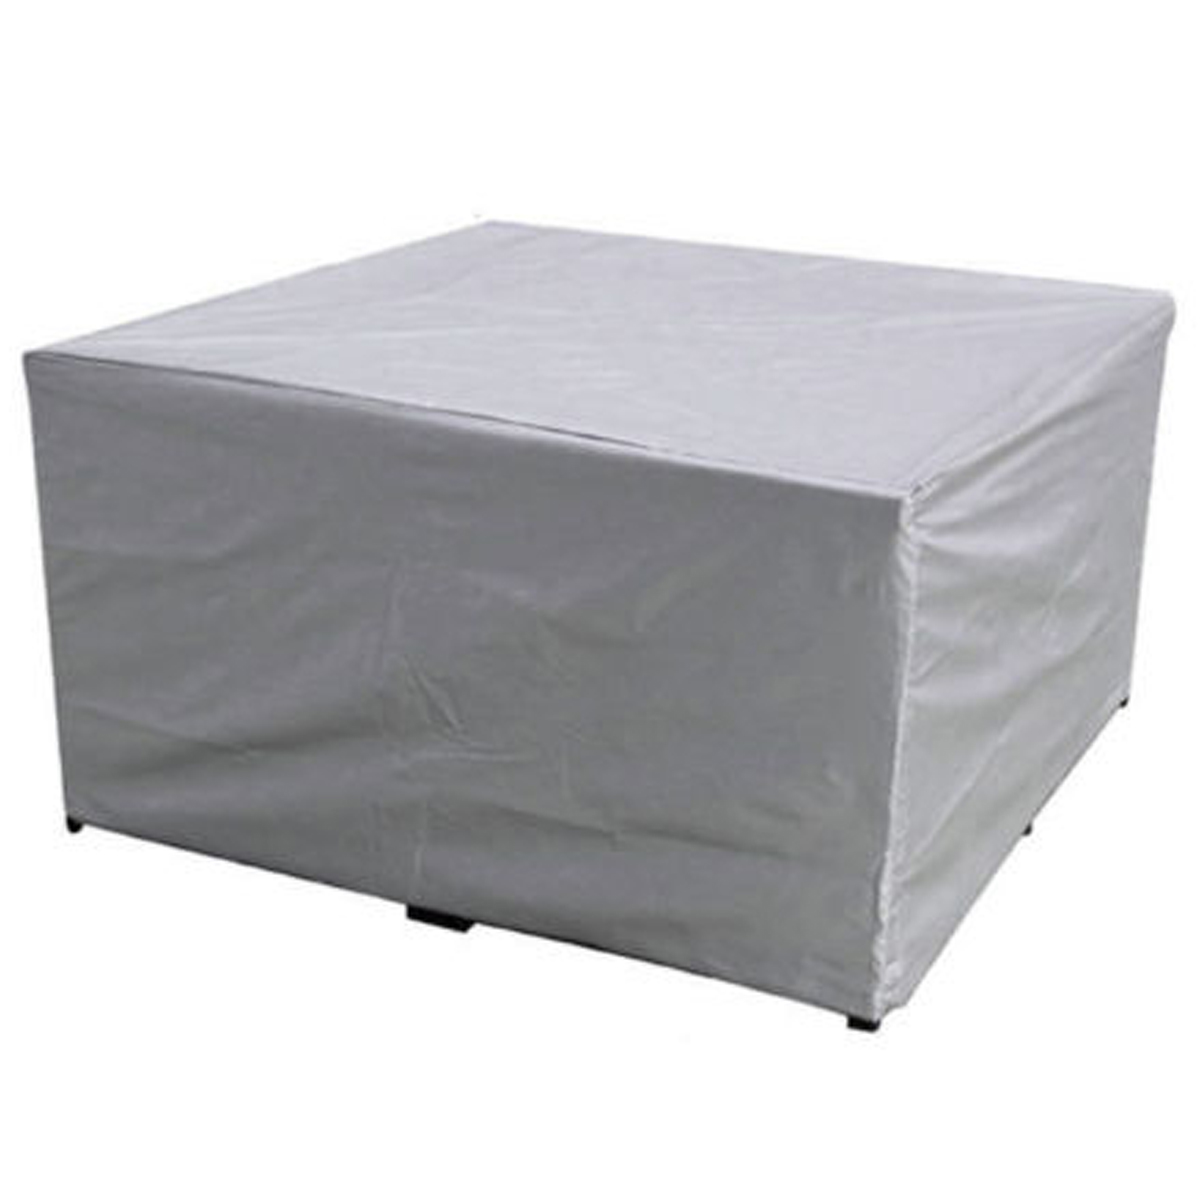 Large-Capacity-Waterproof-Furniture-Table-Sofa-Chair-Cover-Garden-Outdoor-Patio-Protector-1558324-4